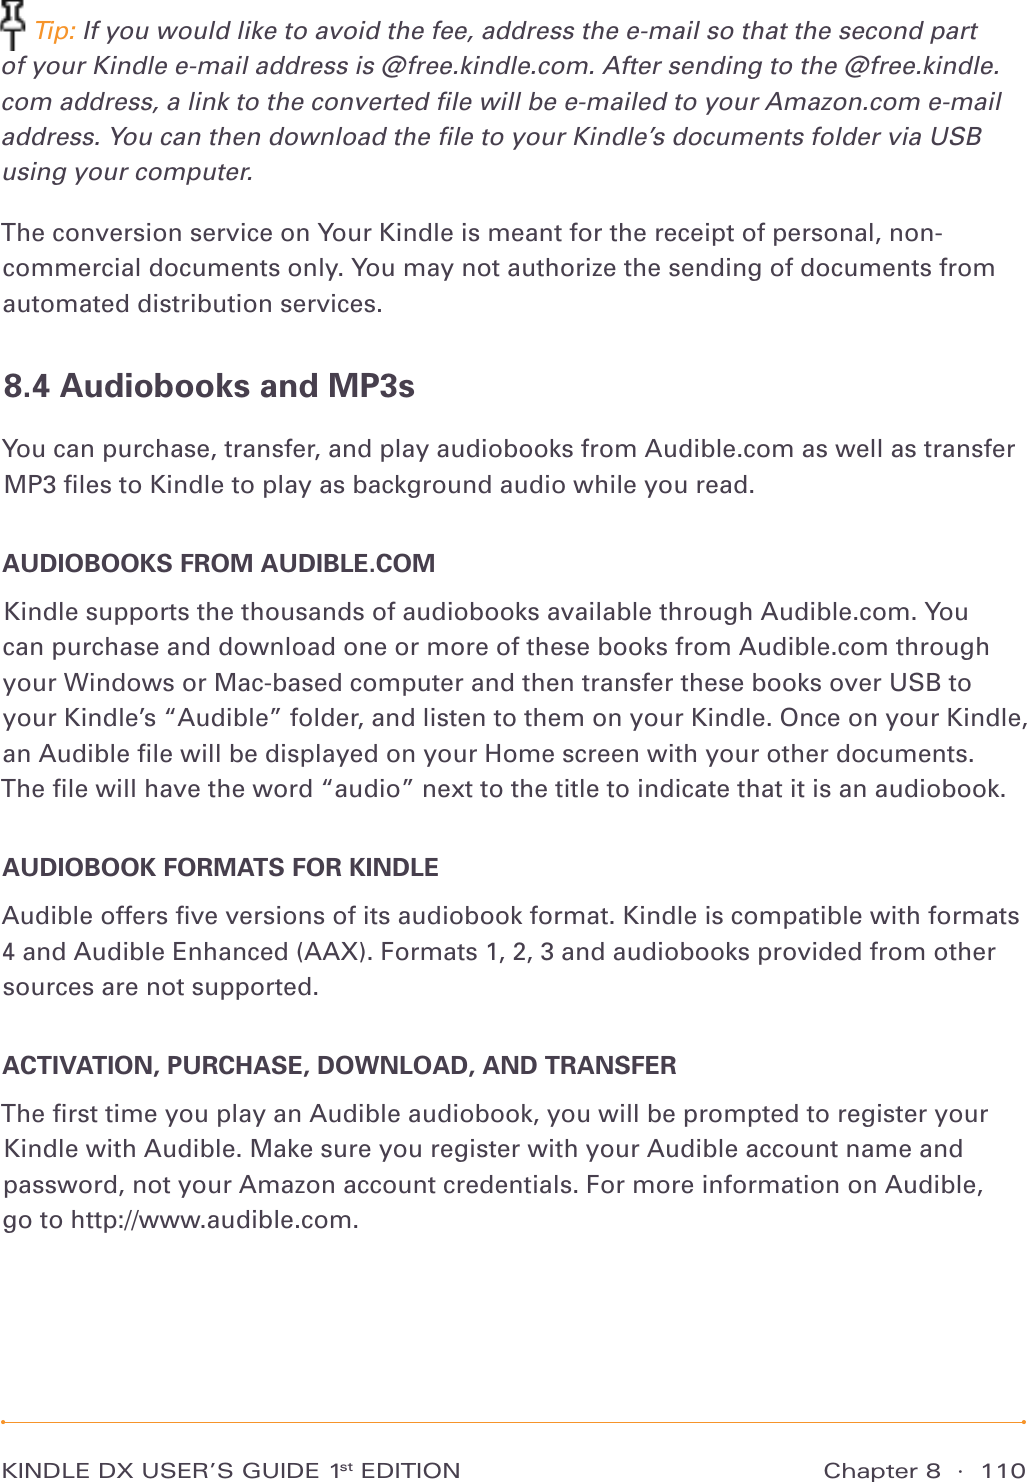 Chapter 8  ·  110KINDLE DX USER’S GUIDE 1st EDITION Tip: If you would like to avoid the fee, address the e-mail so that the second part of your Kindle e-mail address is @free.kindle.com. After sending to the @free.kindle.com address, a link to the converted ﬁle will be e-mailed to your Amazon.com e-mail address. You can then download the ﬁle to your Kindle’s documents folder via USB using your computer.The conversion service on Your Kindle is meant for the receipt of personal, non-commercial documents only. You may not authorize the sending of documents from automated distribution services.8.4 Audiobooks and MP3sYou can purchase, transfer, and play audiobooks from Audible.com as well as transfer MP3 ﬁles to Kindle to play as background audio while you read. AUDIOBOOKS FROM AUDIBLE.COMKindle supports the thousands of audiobooks available through Audible.com. You  can purchase and download one or more of these books from Audible.com through your Windows or Mac-based computer and then transfer these books over USB to your Kindle’s “Audible” folder, and listen to them on your Kindle. Once on your Kindle, an Audible ﬁle will be displayed on your Home screen with your other documents. The ﬁle will have the word “audio” next to the title to indicate that it is an audiobook.AUDIOBOOK FORMATS FOR KINDLEAudible offers ﬁve versions of its audiobook format. Kindle is compatible with formats 4 and Audible Enhanced (AAX). Formats 1, 2, 3 and audiobooks provided from other sources are not supported.ACTIVATION, PURCHASE, DOWNLOAD, AND TRANSFERThe ﬁrst time you play an Audible audiobook, you will be prompted to register your Kindle with Audible. Make sure you register with your Audible account name and password, not your Amazon account credentials. For more information on Audible,  go to http://www.audible.com.